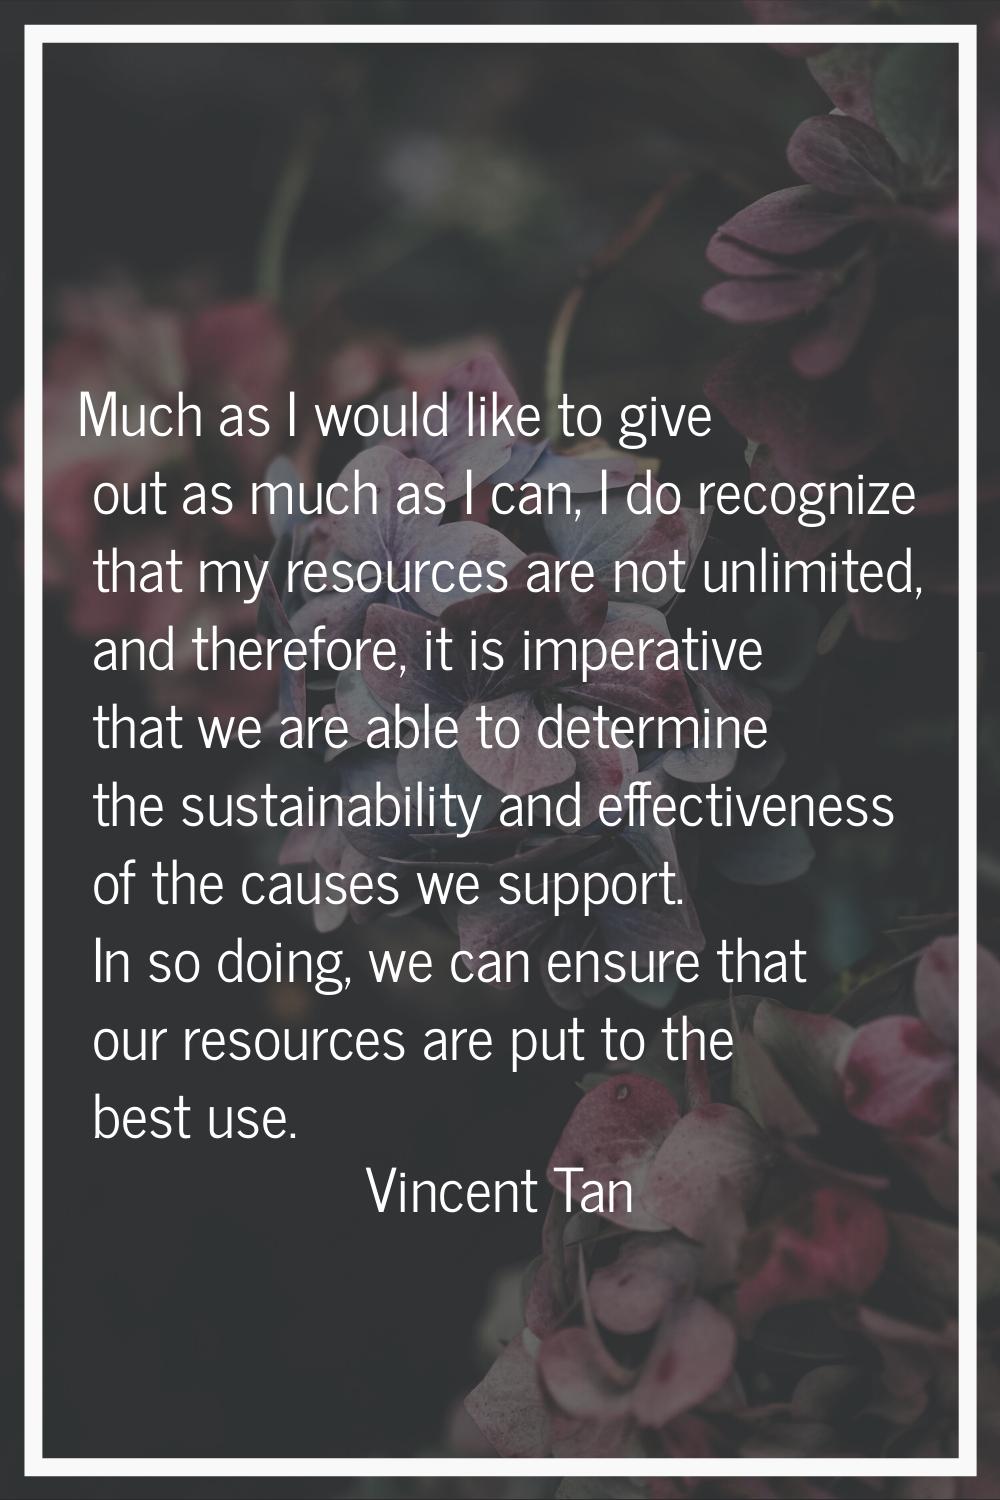 Much as I would like to give out as much as I can, I do recognize that my resources are not unlimit